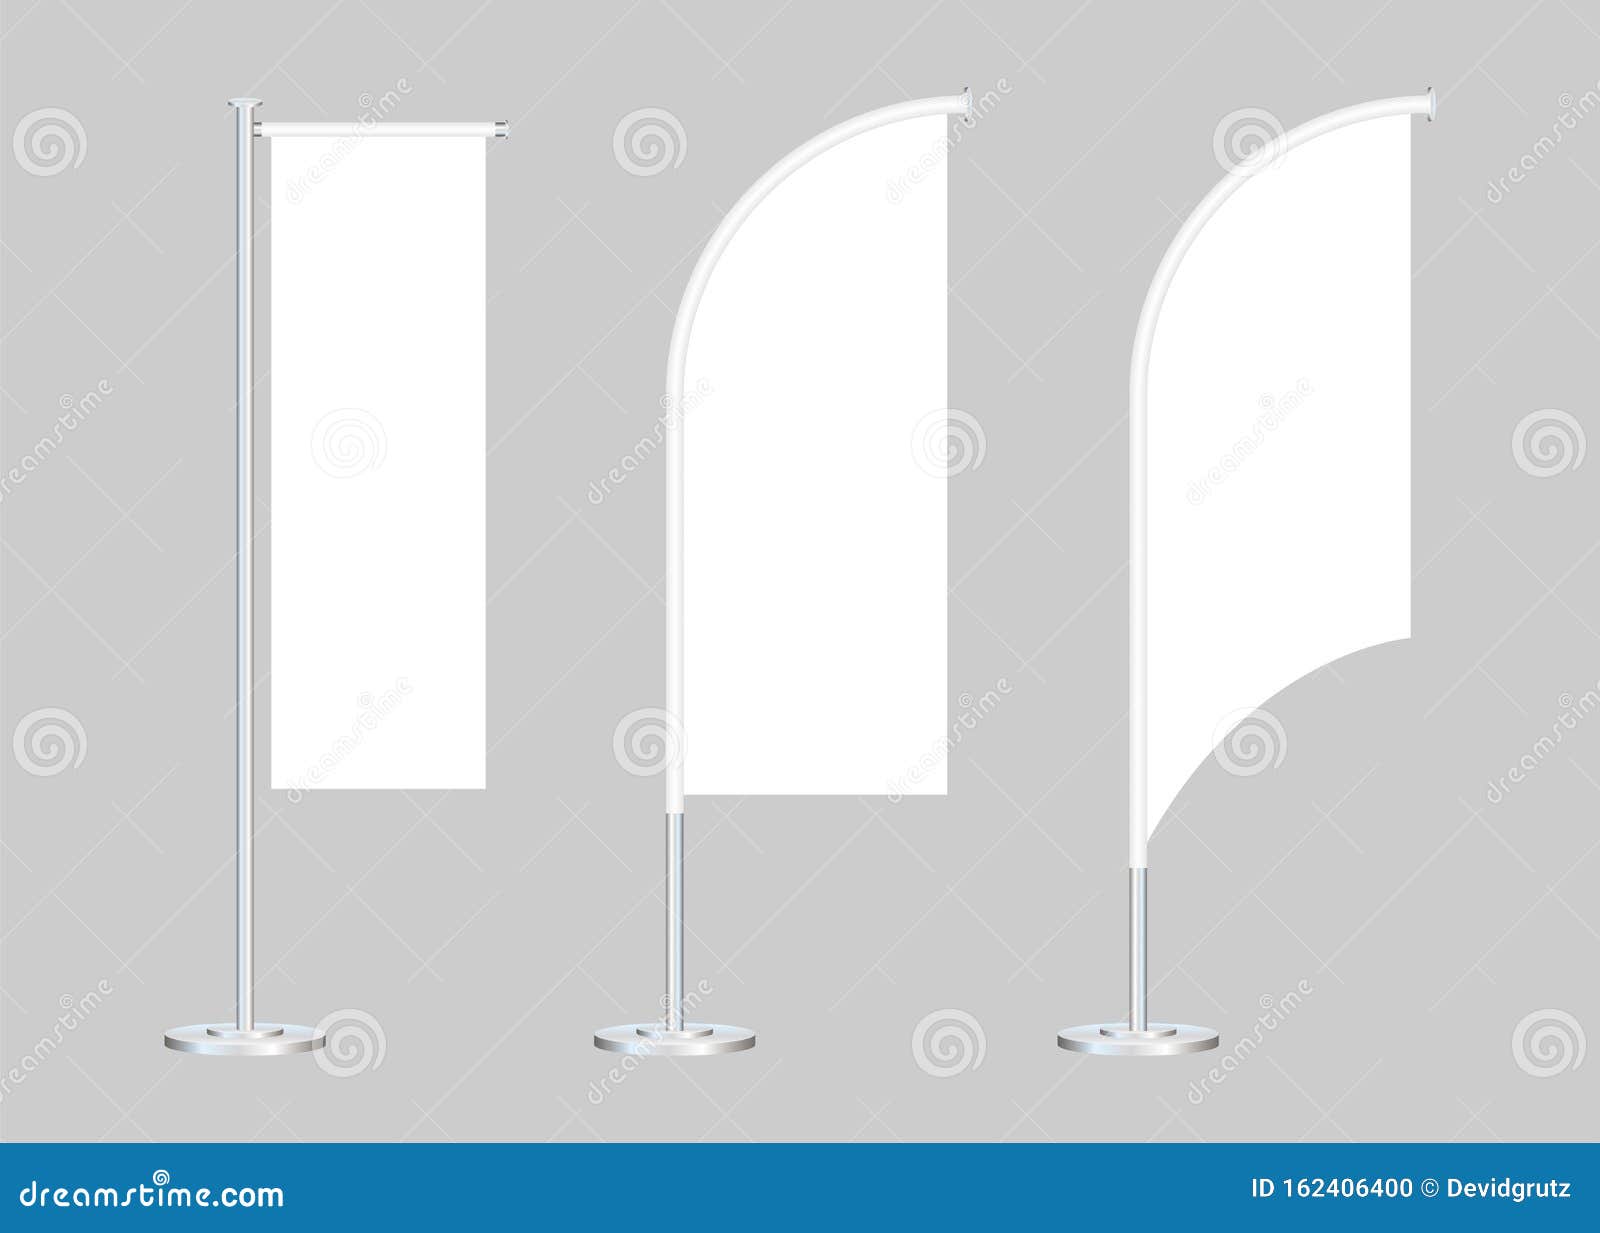 Download Beach Flag Stand Empty Template Mockup Set On A Grey ...